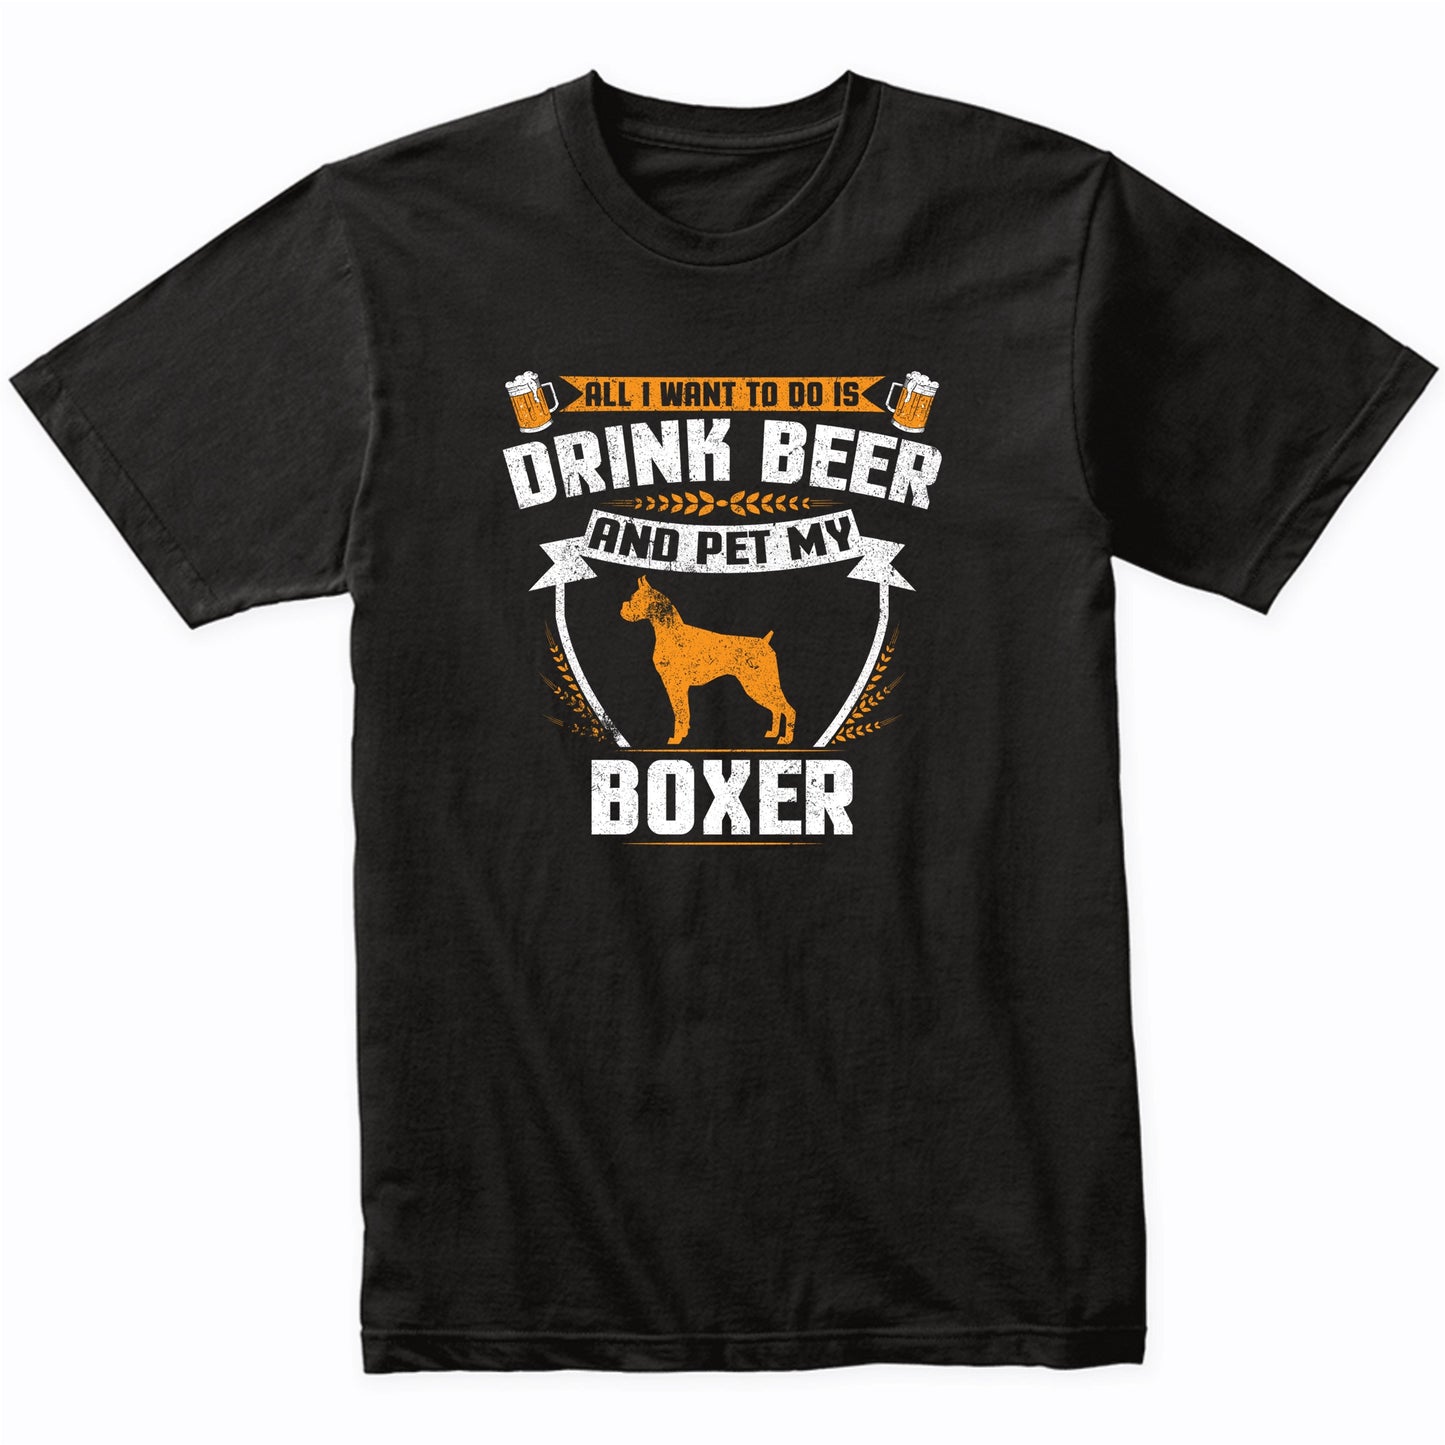 All I Want To Do Is Drink Beer And Pet My Boxer Funny Dog Owner Shirt